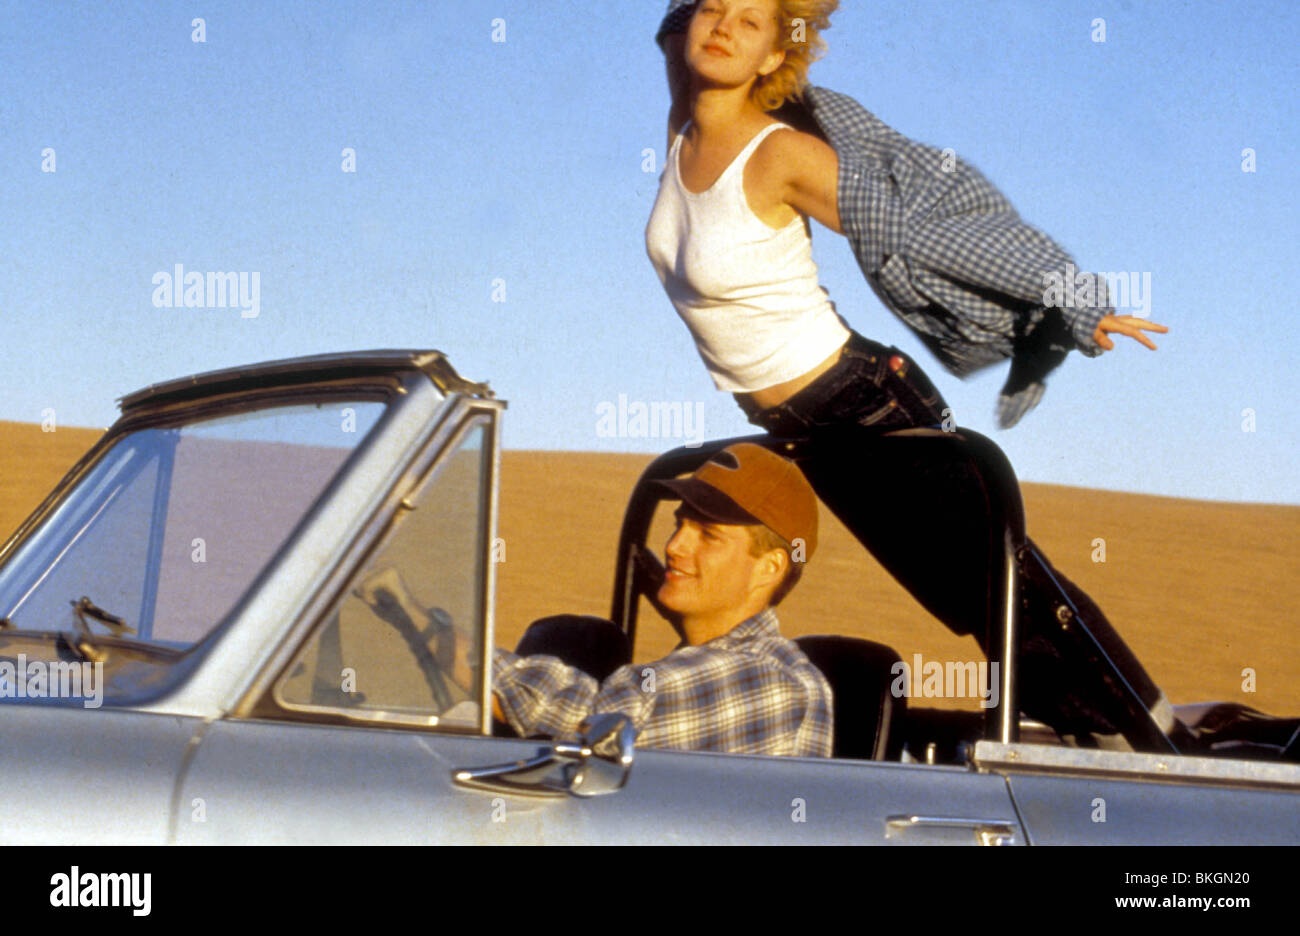 MAD LOVE (1995) CHRIS O' DONNELL, DREW BARRYMORE MADL 048 Stockfoto